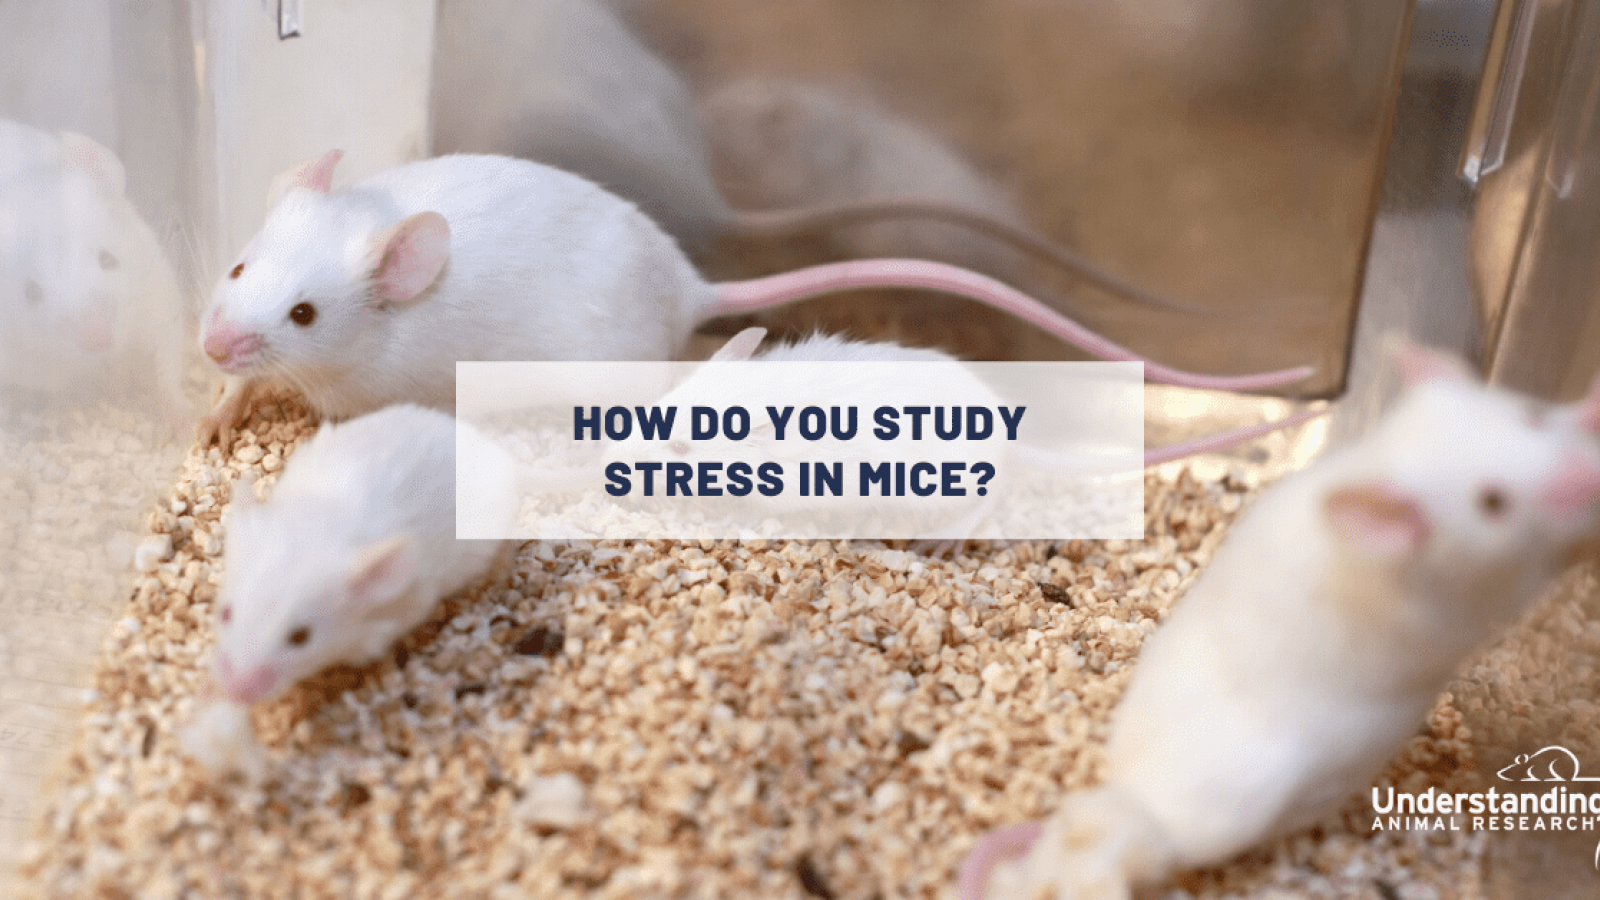 How do you study stress in mice? :: Understanding Animal Research